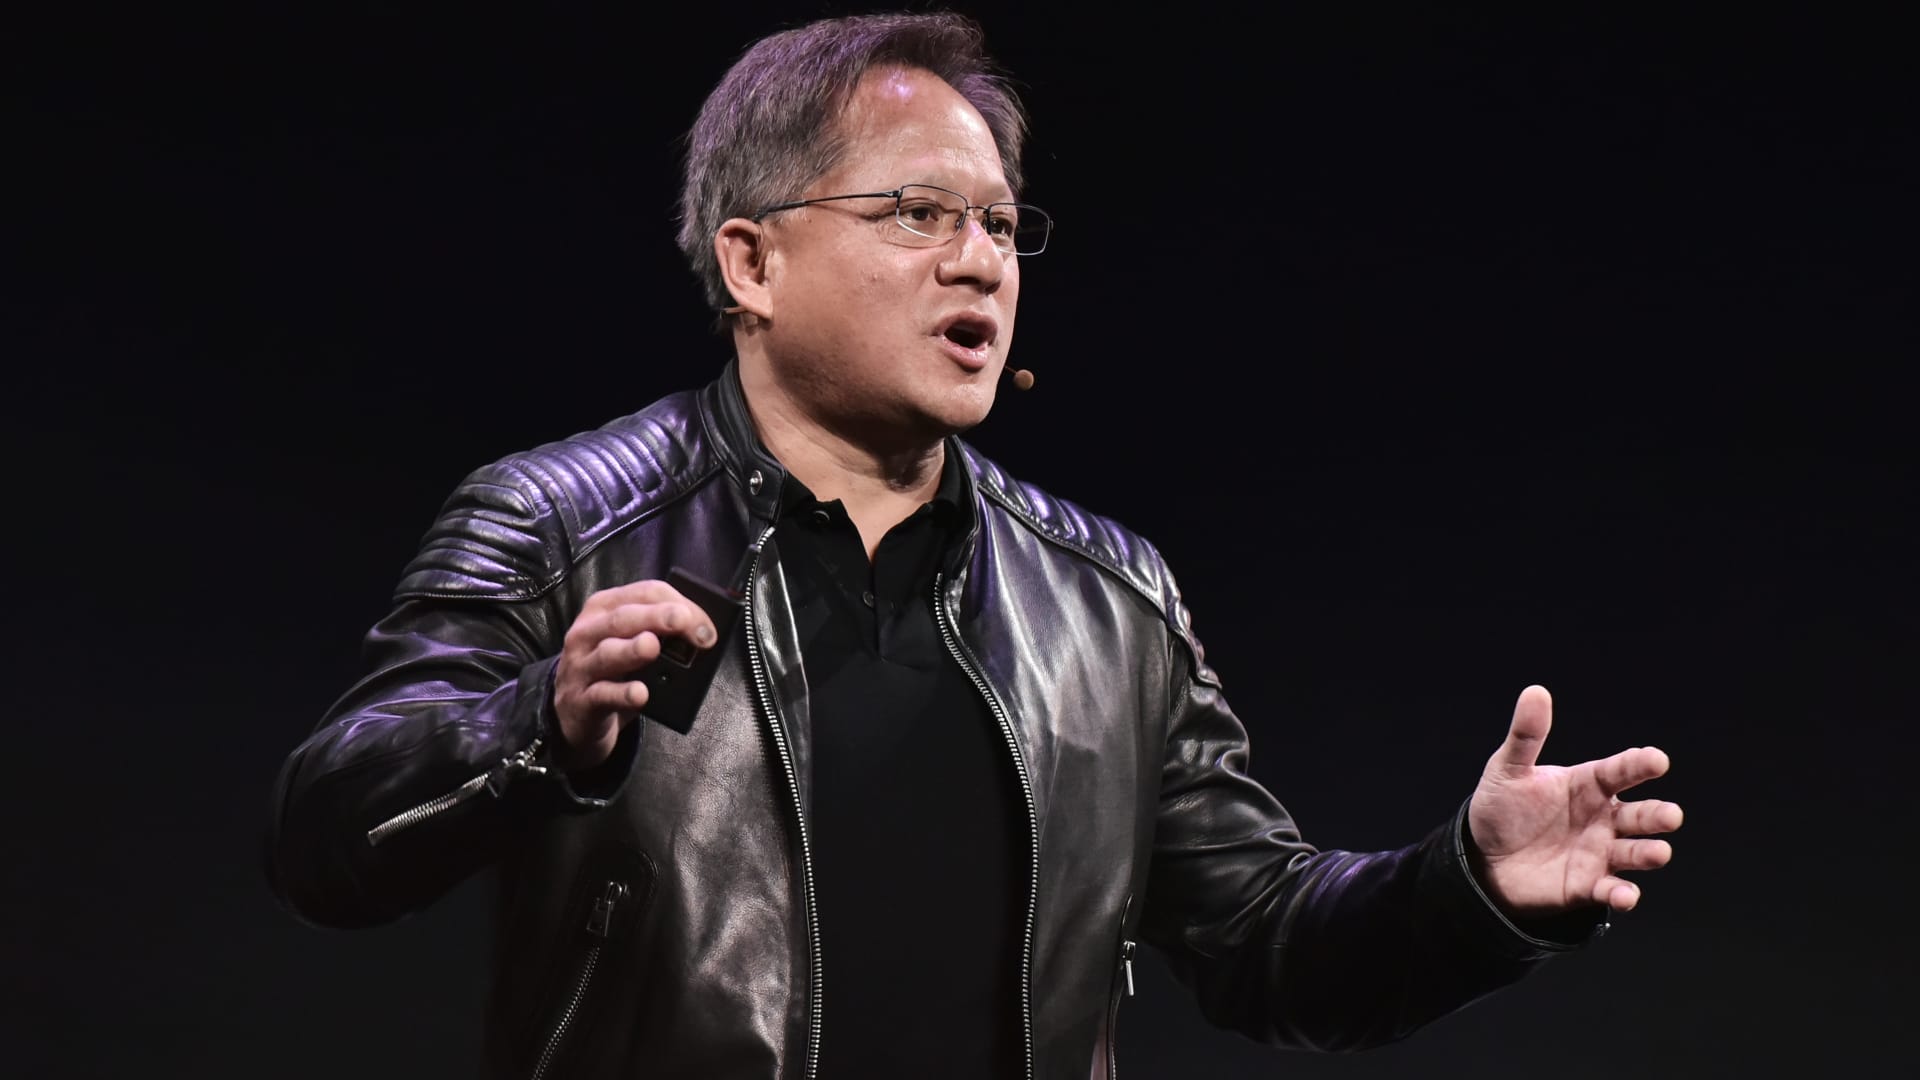 Nvidia shares up 12% on earnings and bullish outlook on A.I.